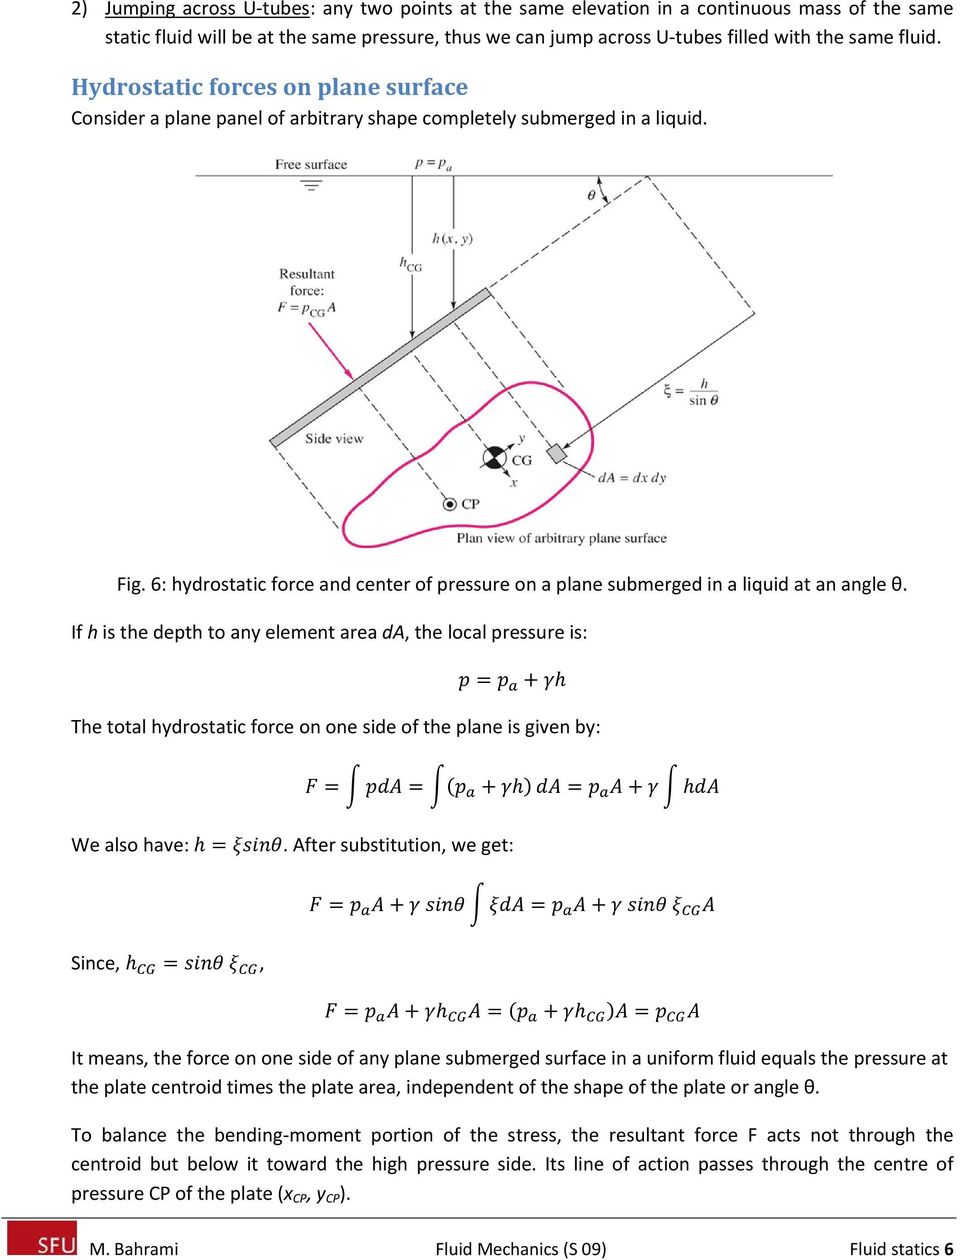 6: hydrostatic force and center of pressure on a plane submerged in a liquid at an angle θ.